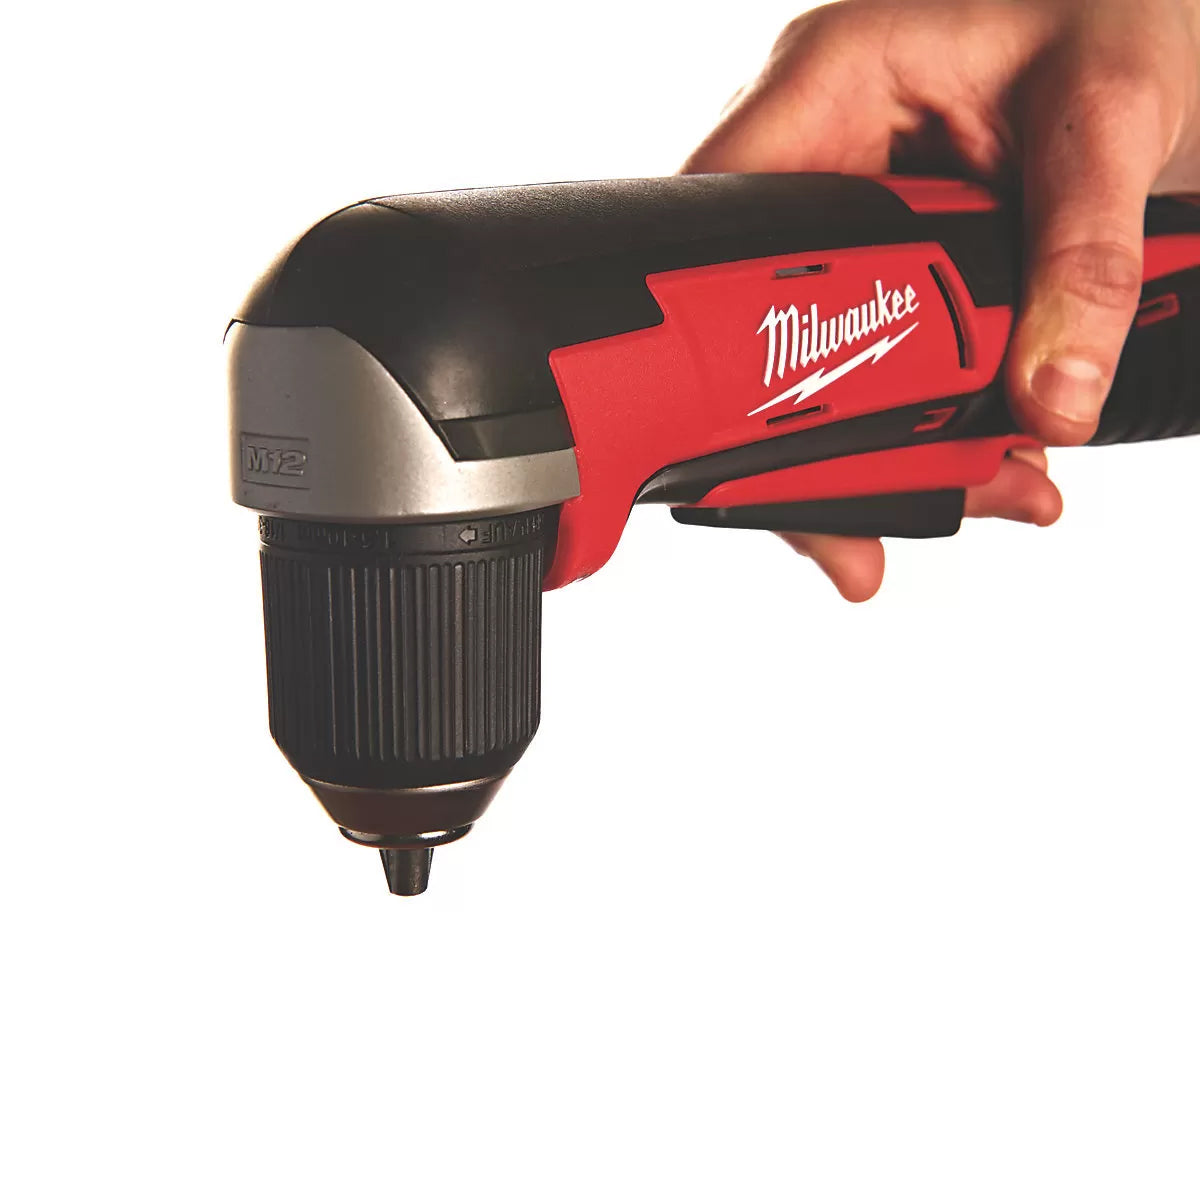 Milwaukee C12RAD-0 12V Angle Drill with 2 x 2.0Ah Batteries & Charger